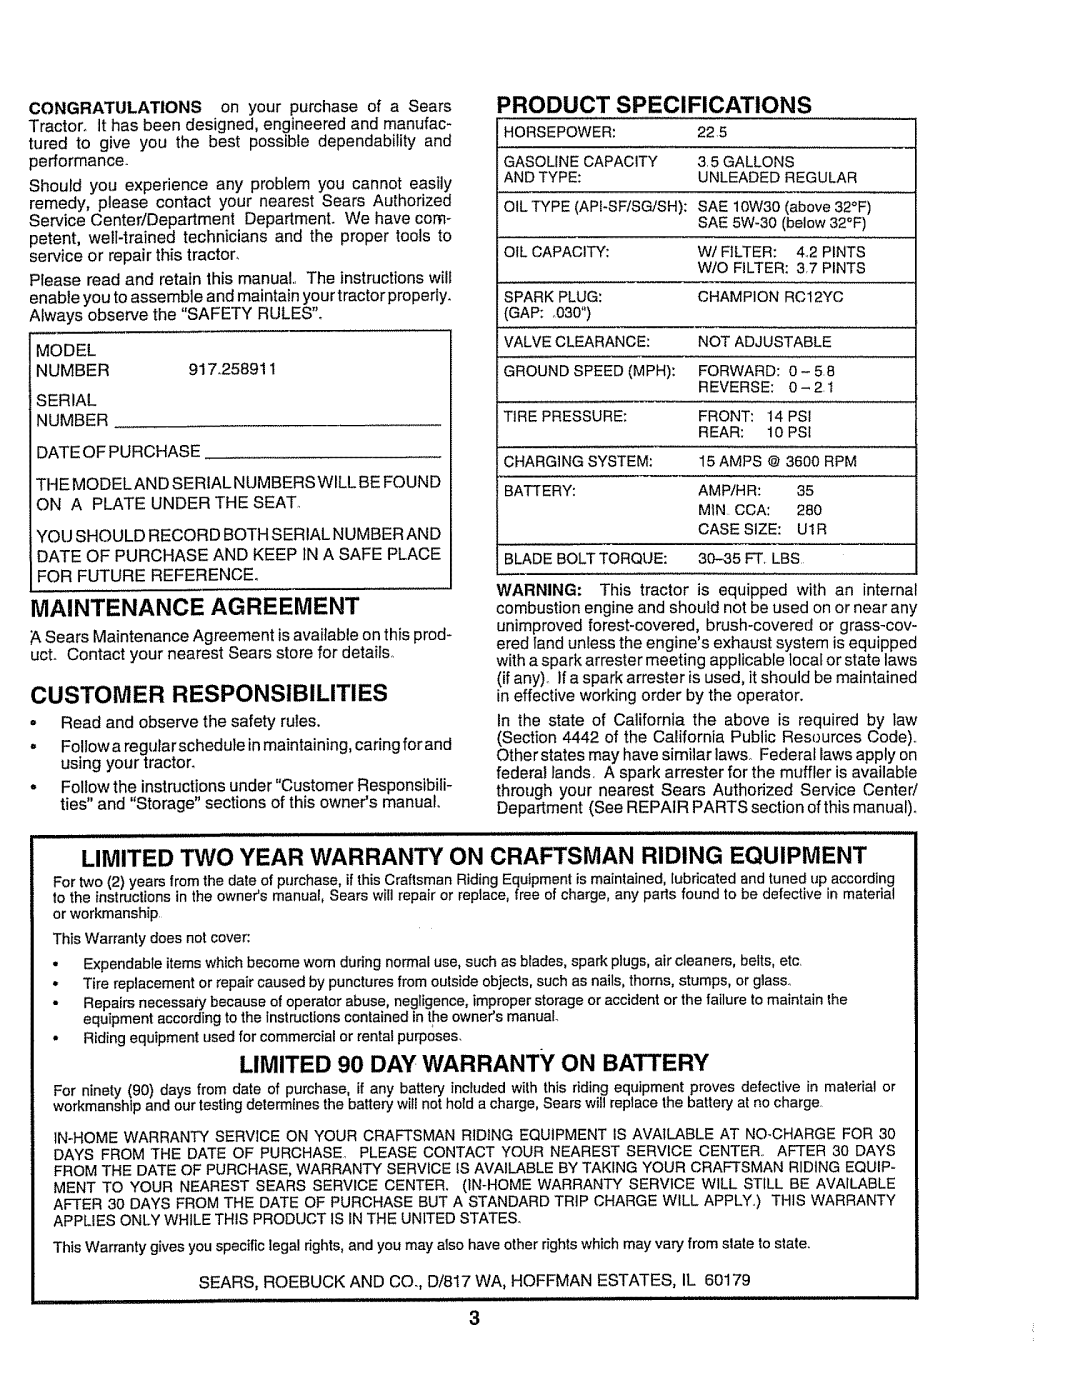 Craftsman 917.258911 owner manual Maintenance Agreement, Customer Responsibilities, Product Specifications 